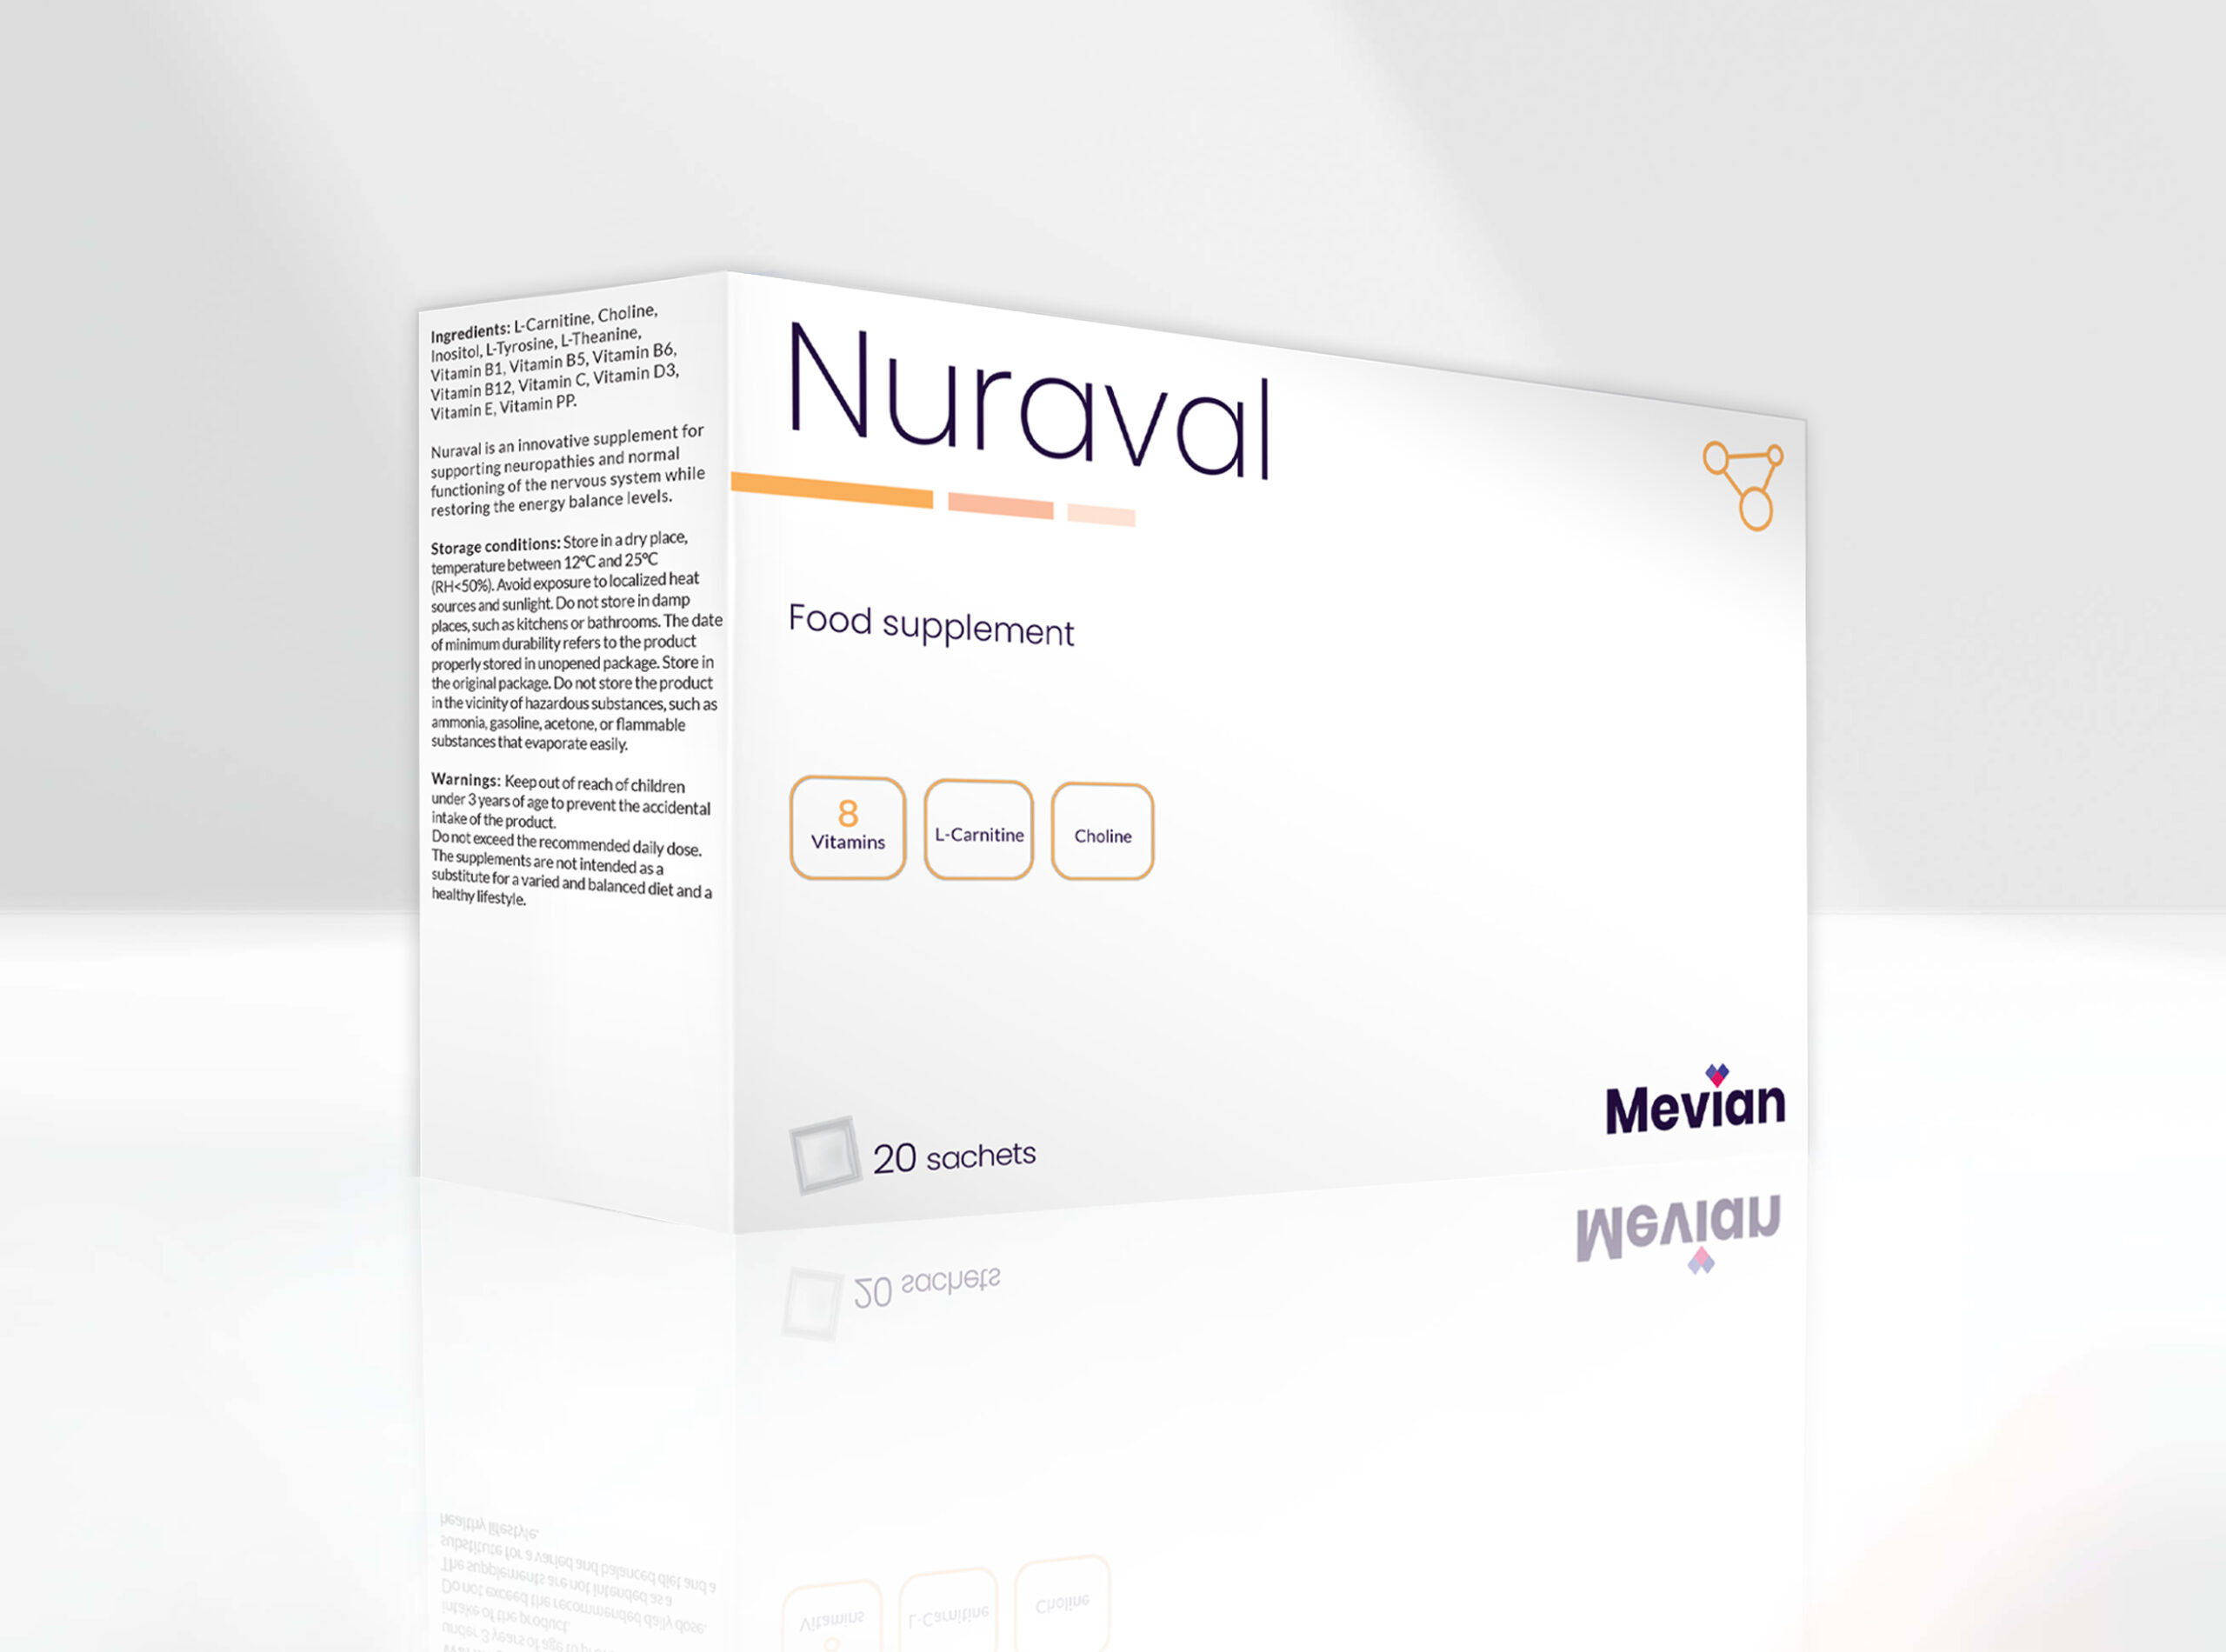 Nuraval is ideal for supporting neuropathies and regular nervous system functioning while restoring energy balance levels.